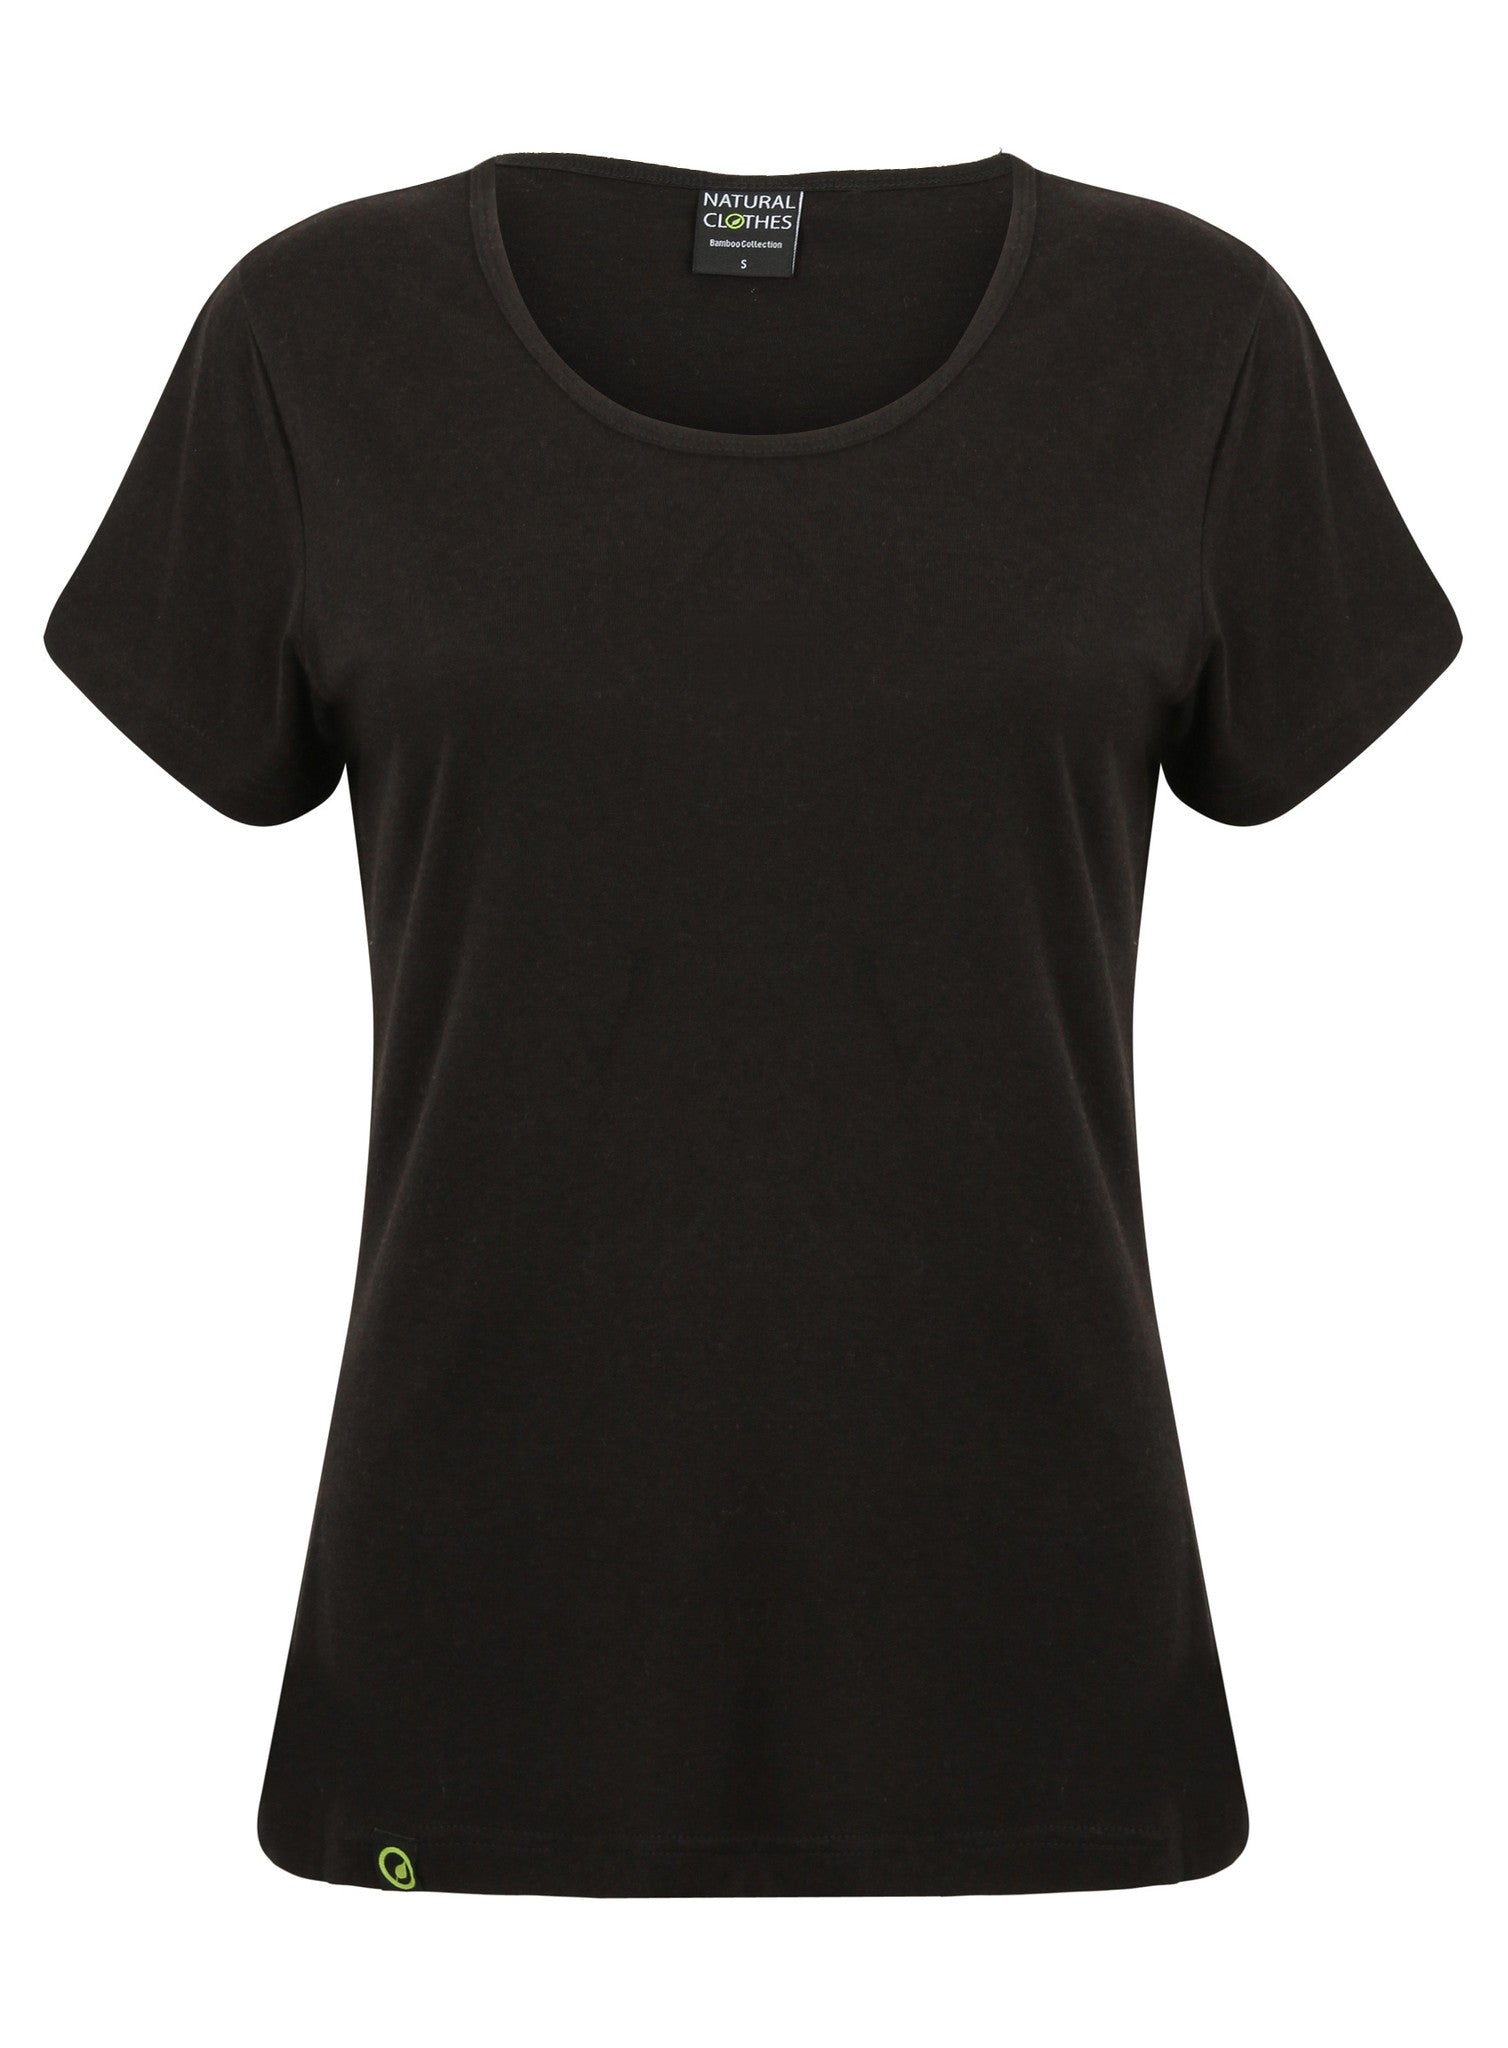 Bamboo Short Sleeve Top Black - Natural Clothes Bamboo Clothing & Accessories for Men & Women 